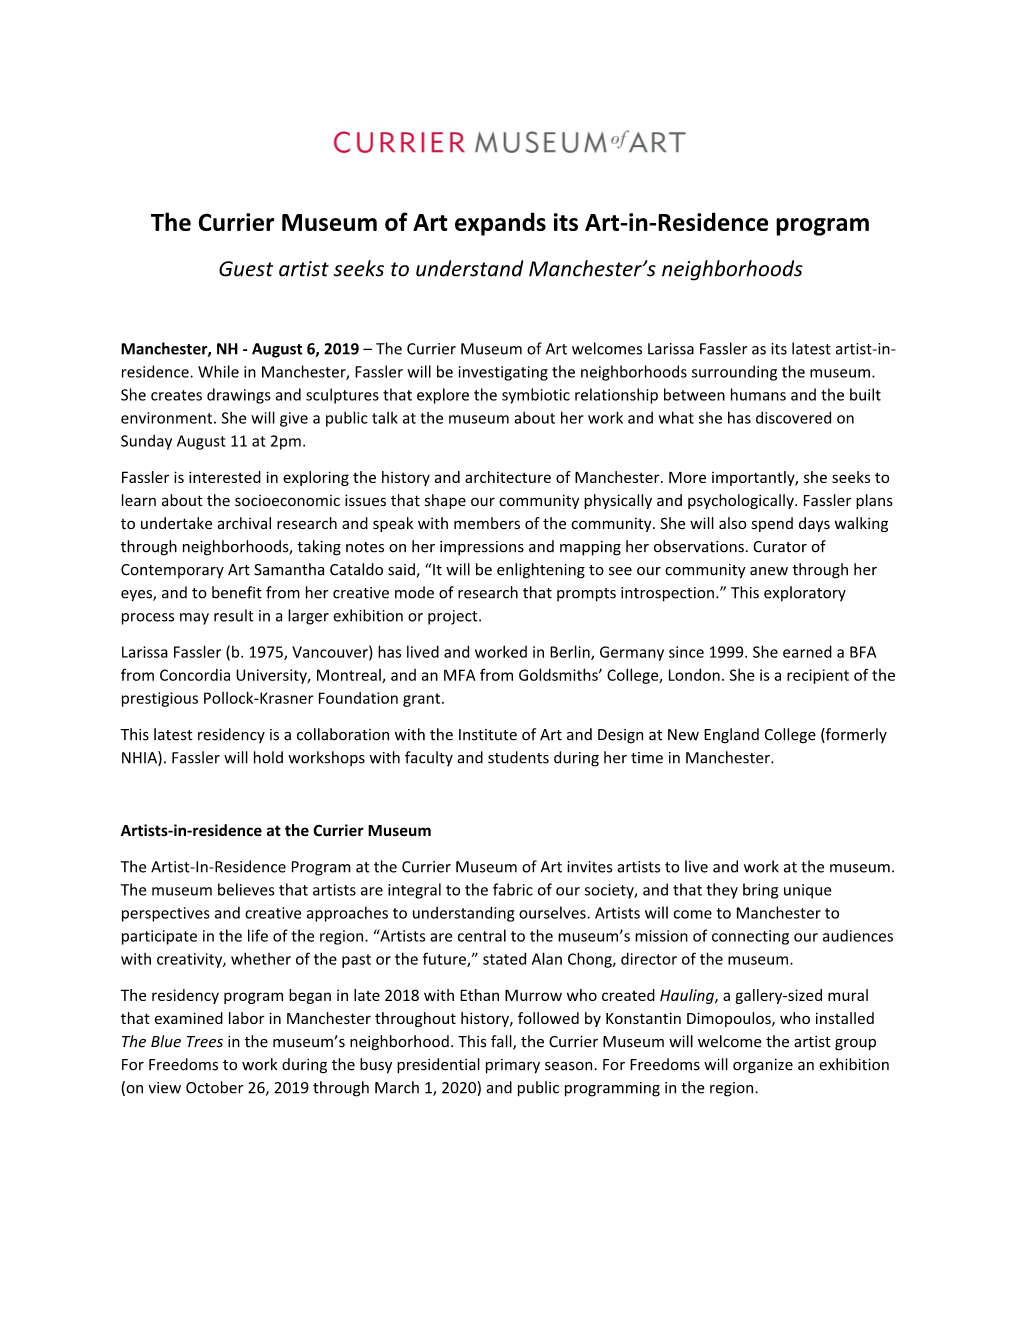 The Currier Museum of Art Expands Its Artist-In-Residence Program